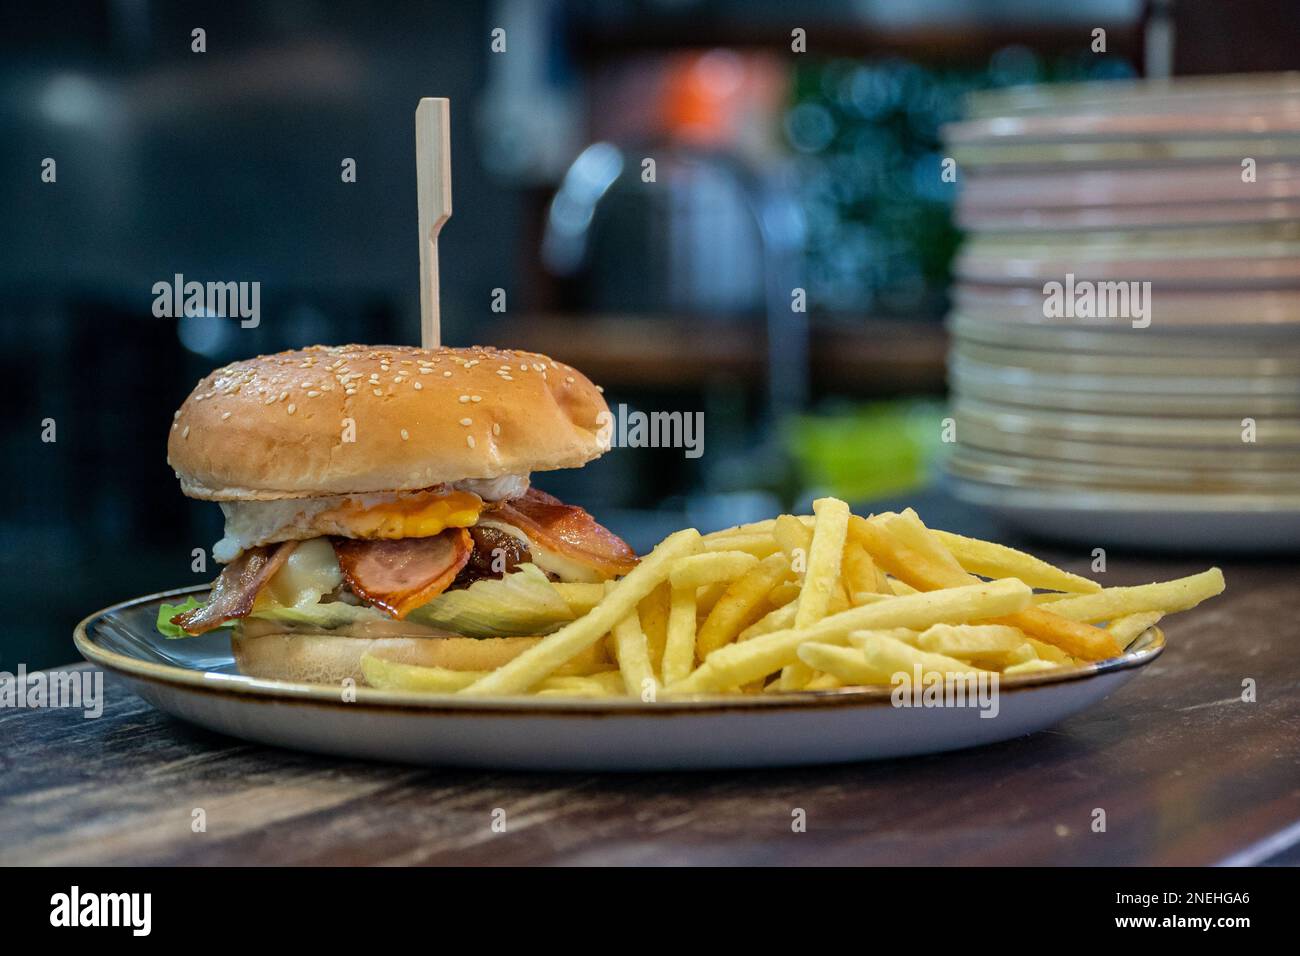 A tasty looking fully loaded beef burger served alongside French Fries eye level Stock Photo